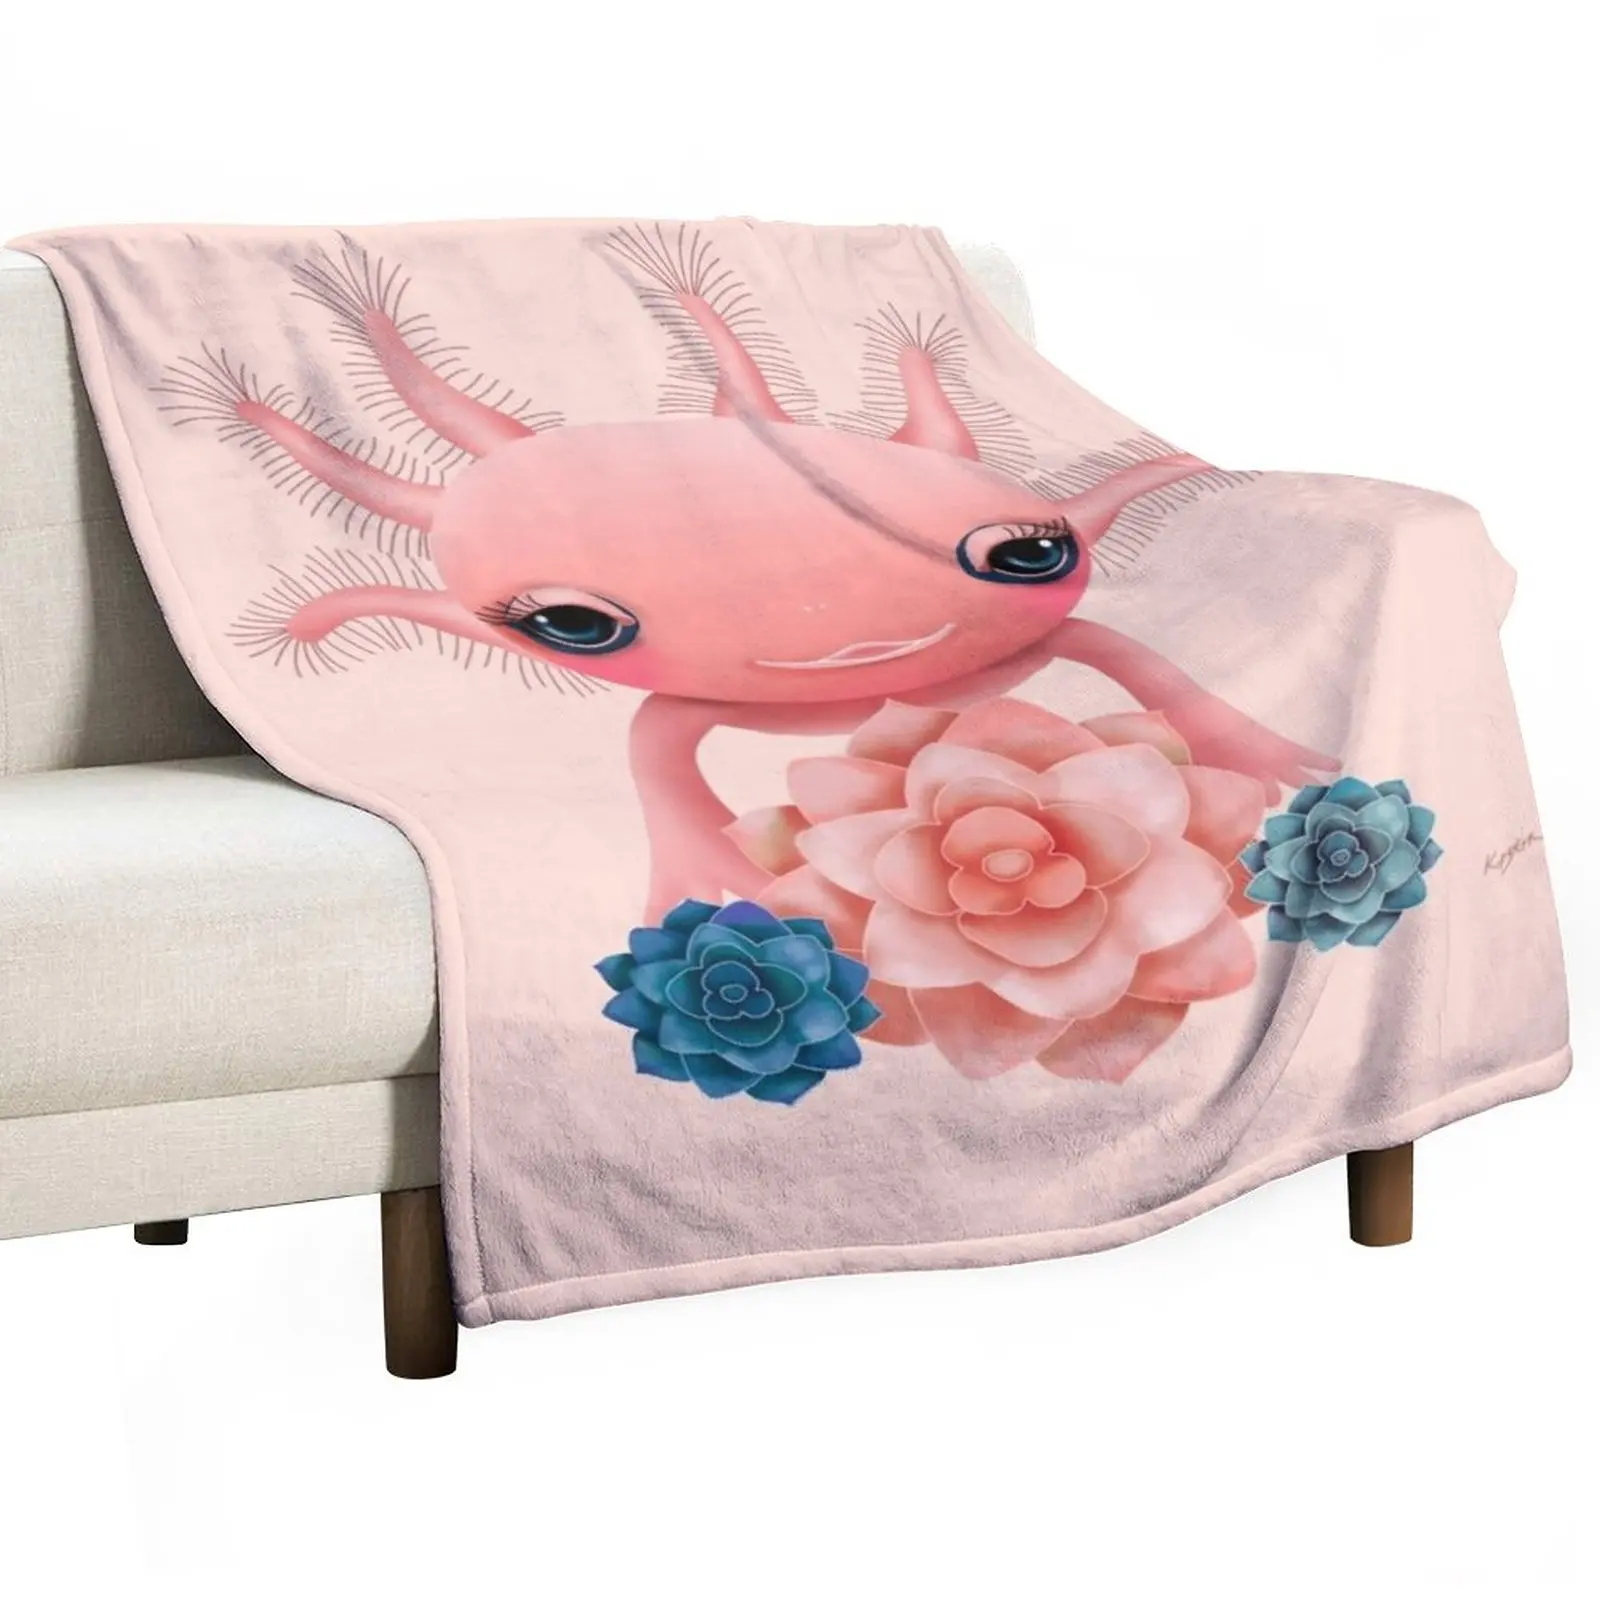 

Pink Axolotl Throw Blanket Personalized Gift For Sofa Thin Fluffy Shaggy Blanket Soft Big Blanket